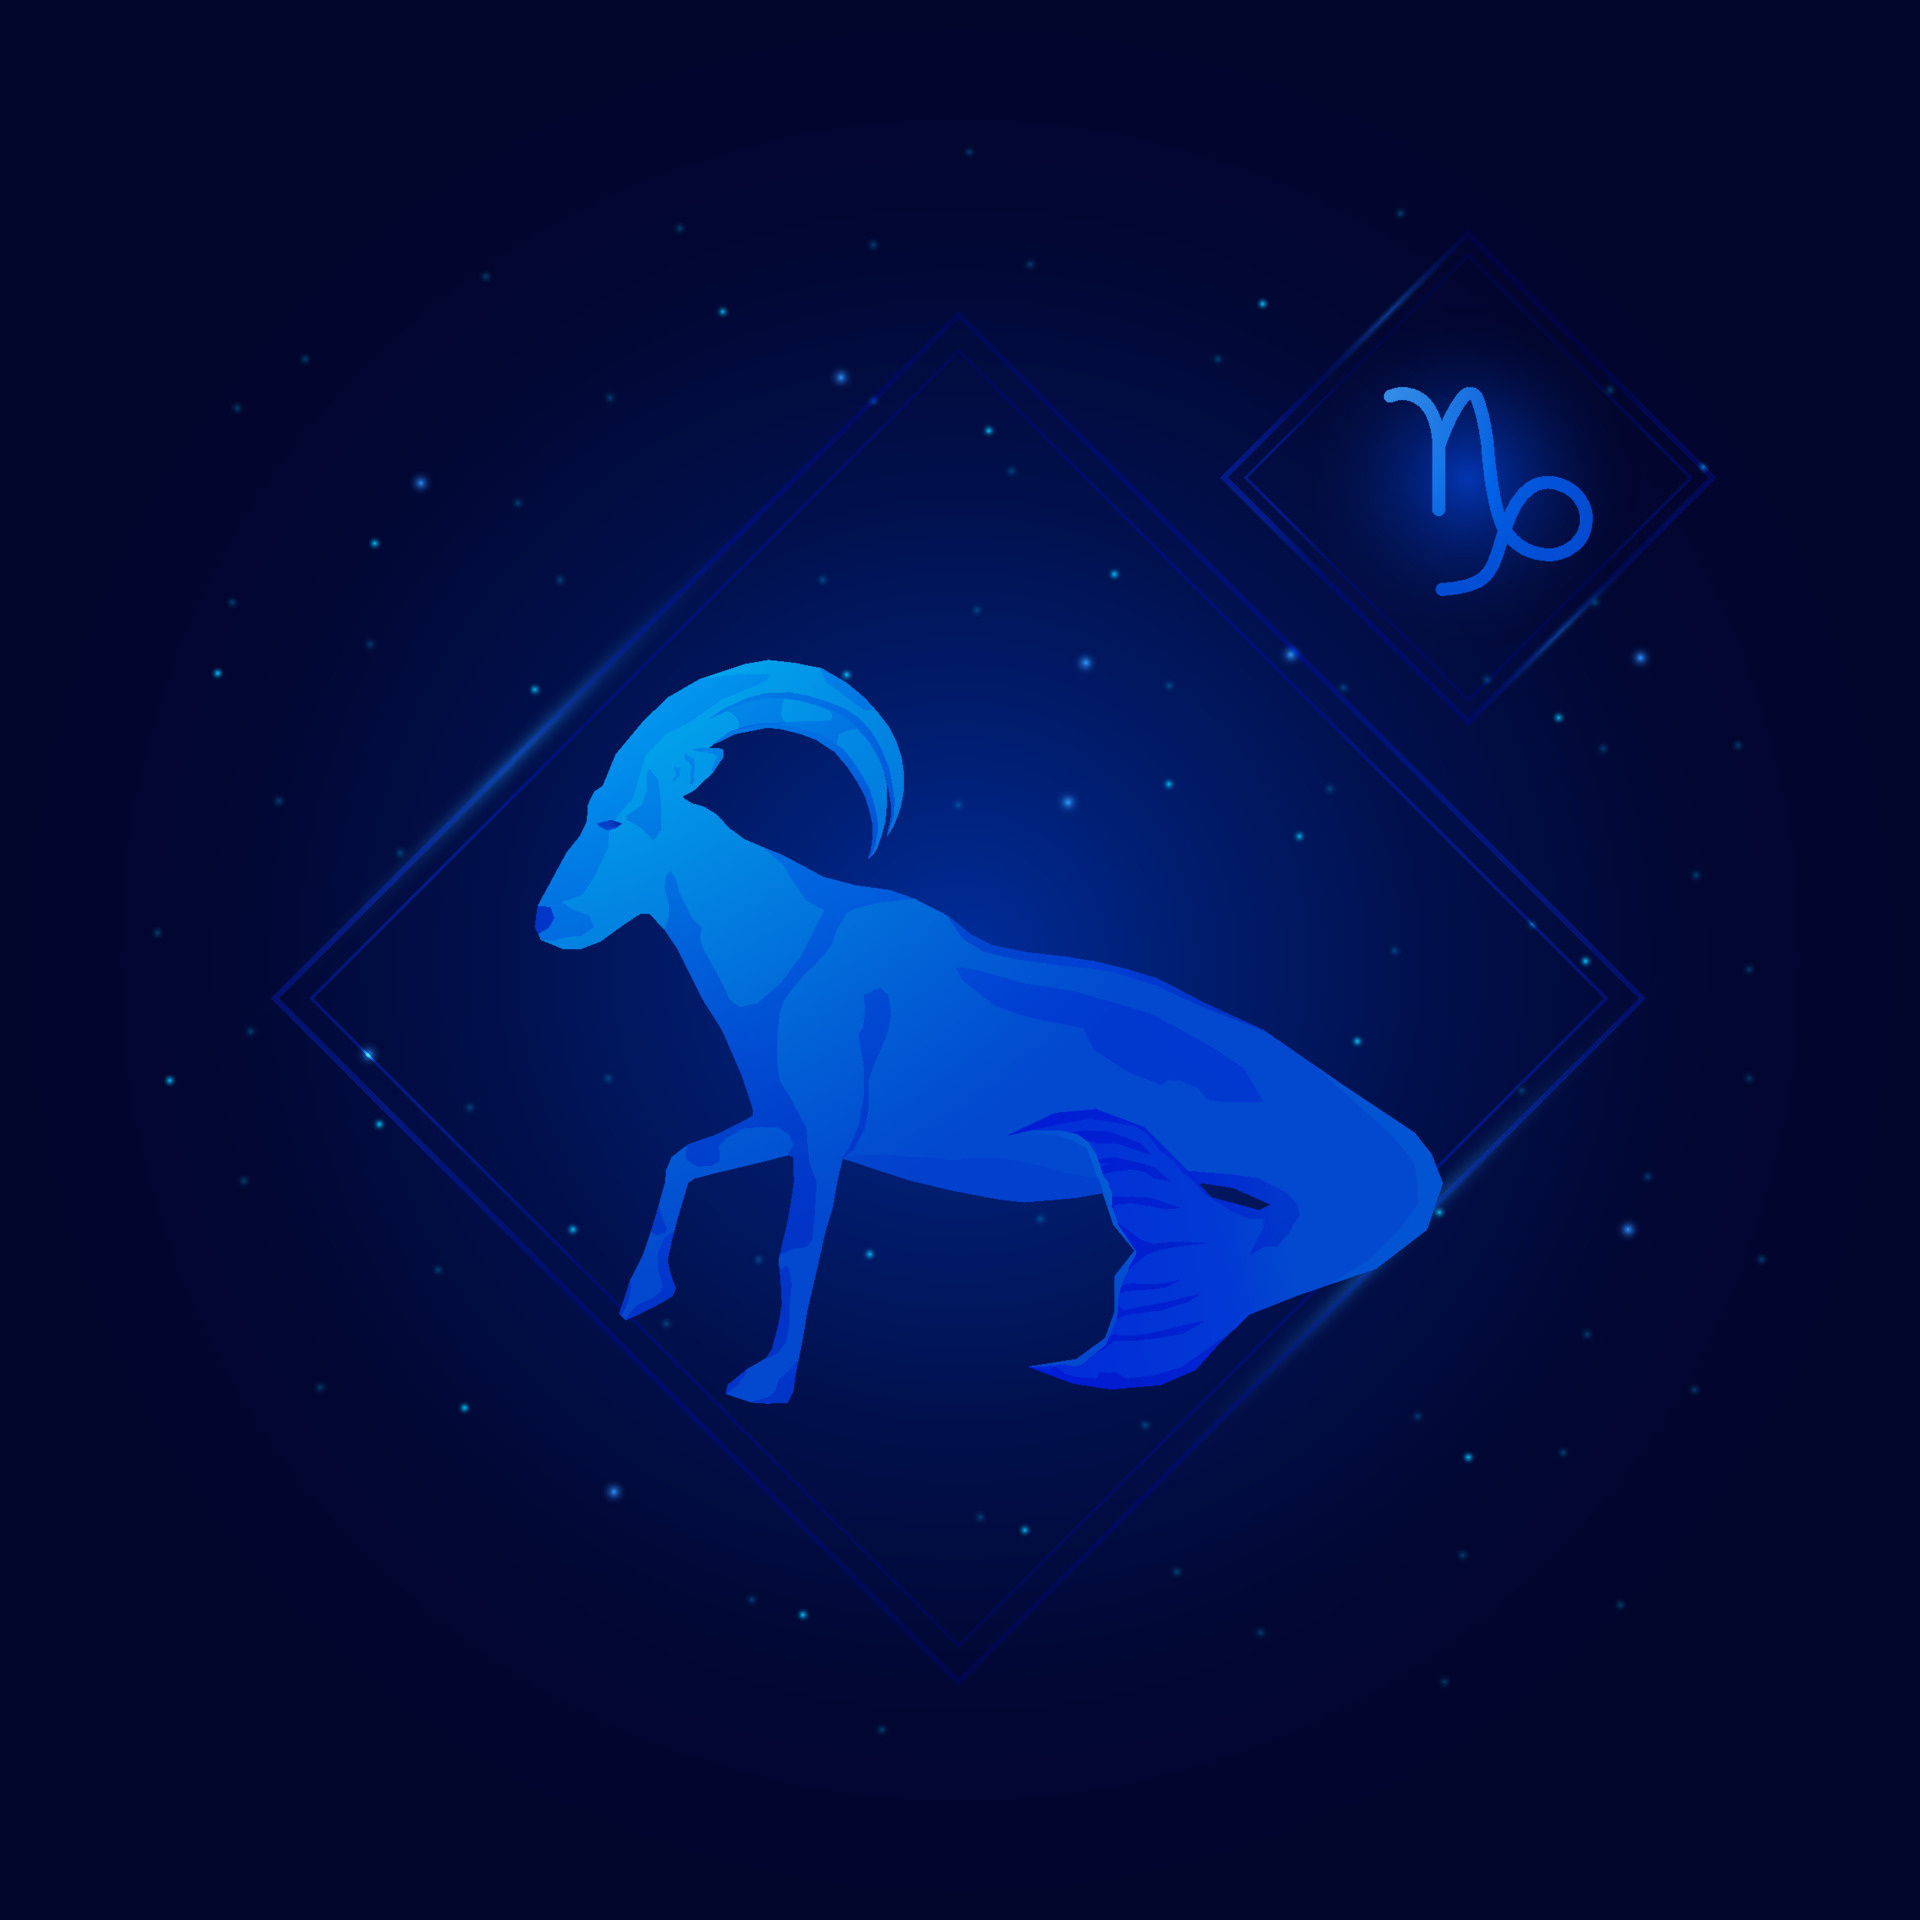 Capricorn Zodiac Sign Wallpapers (17+ images inside)